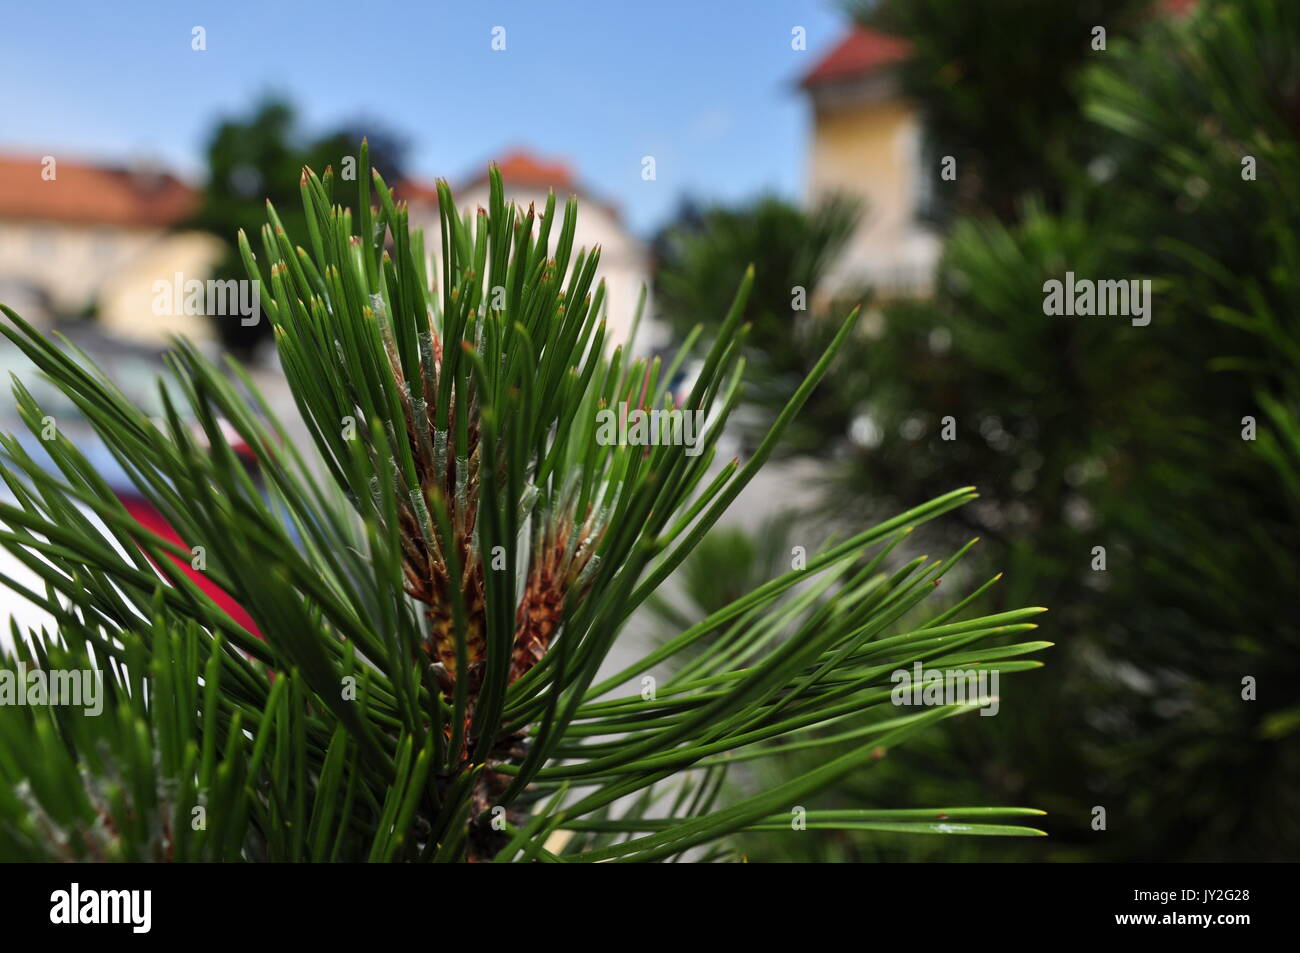 Pine Smell Stock Photos & Pine Smell Stock Images - Alamy